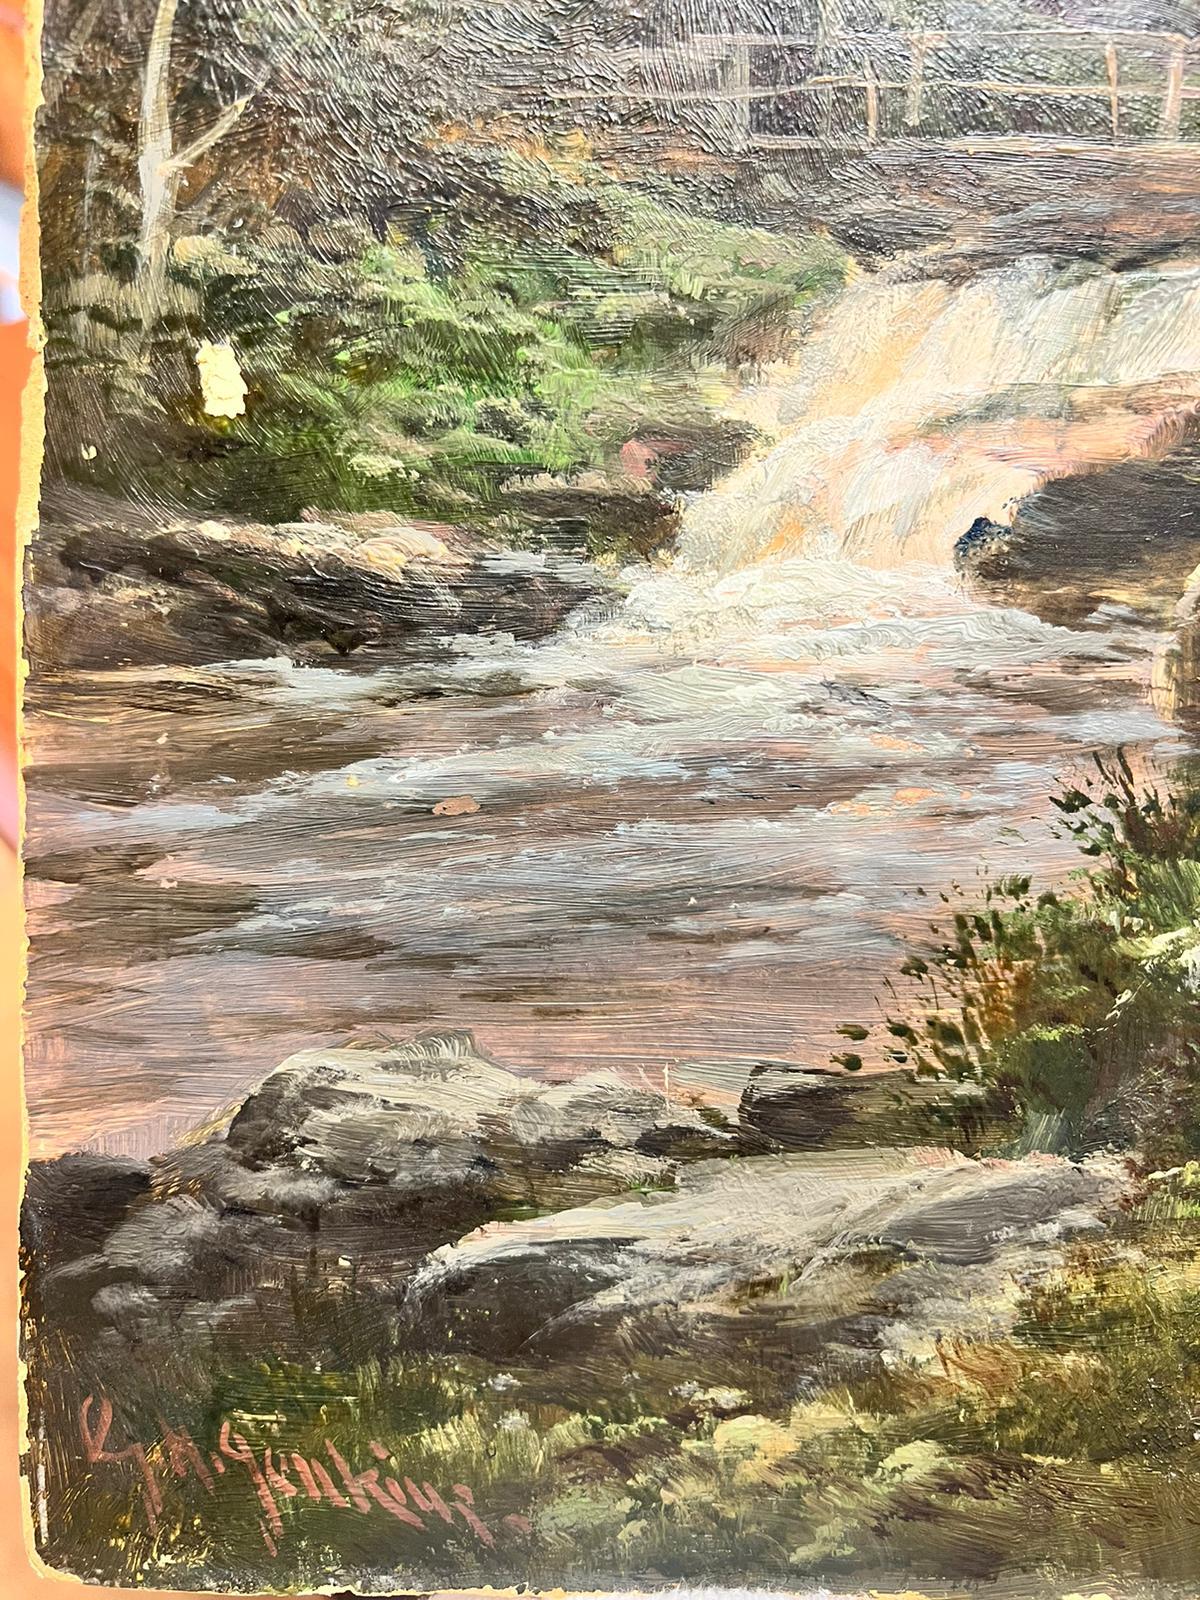 The Highland Waterfall
British School, late 19th century
oil on board
board: 14 x 10 inches
provenance: private collection, UK
condition: sound but with paint loss and some damage to board; it is sold as a restoration project. 
